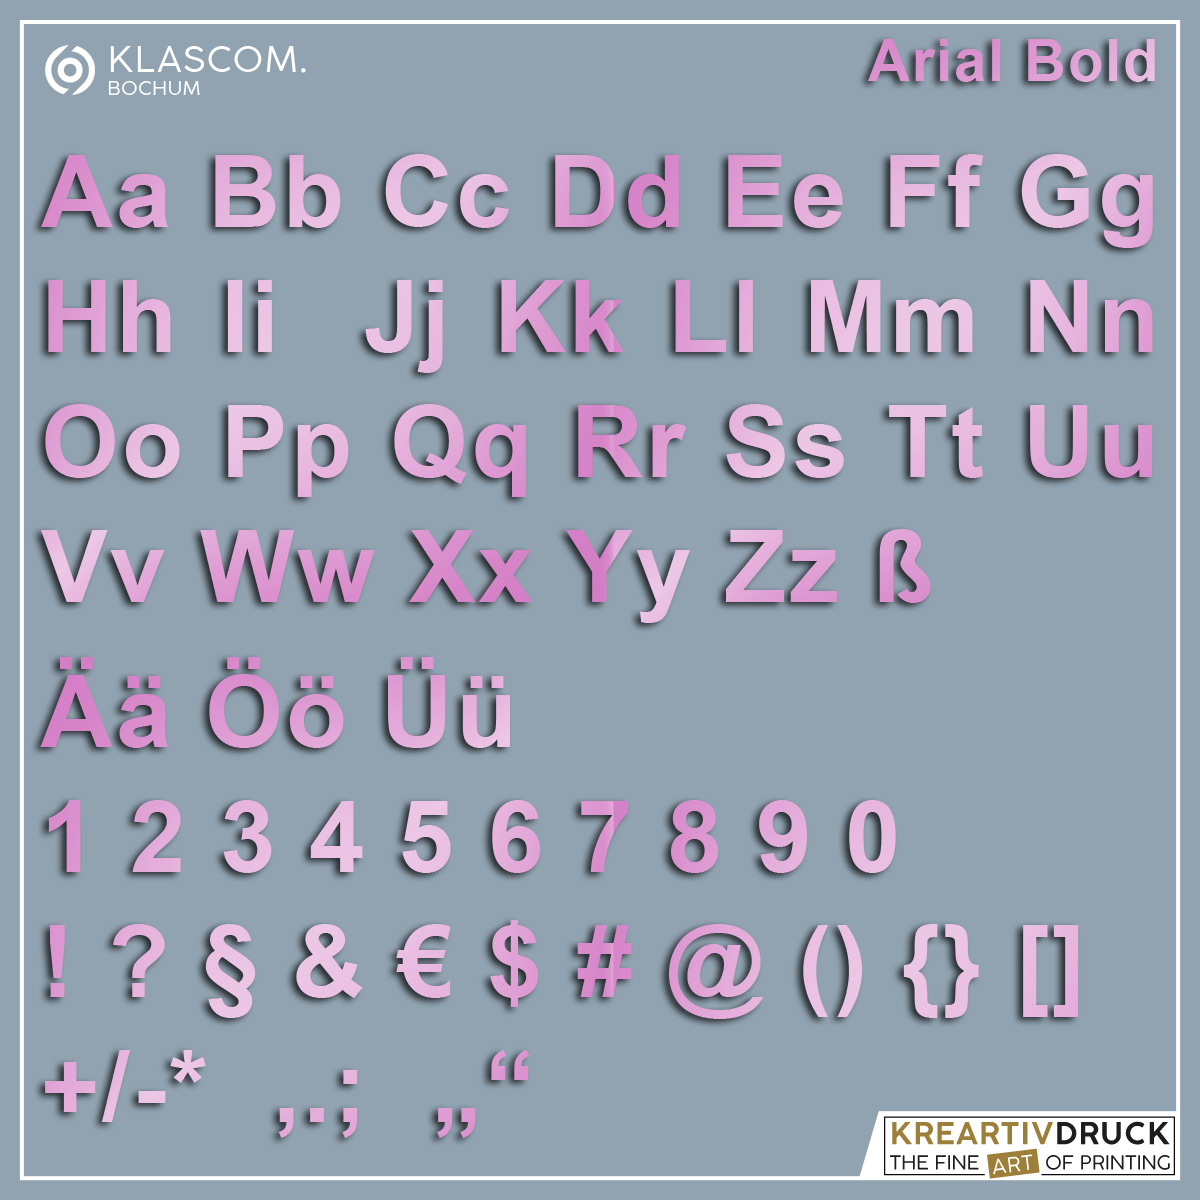 arial-bold-butlerfinish-ros